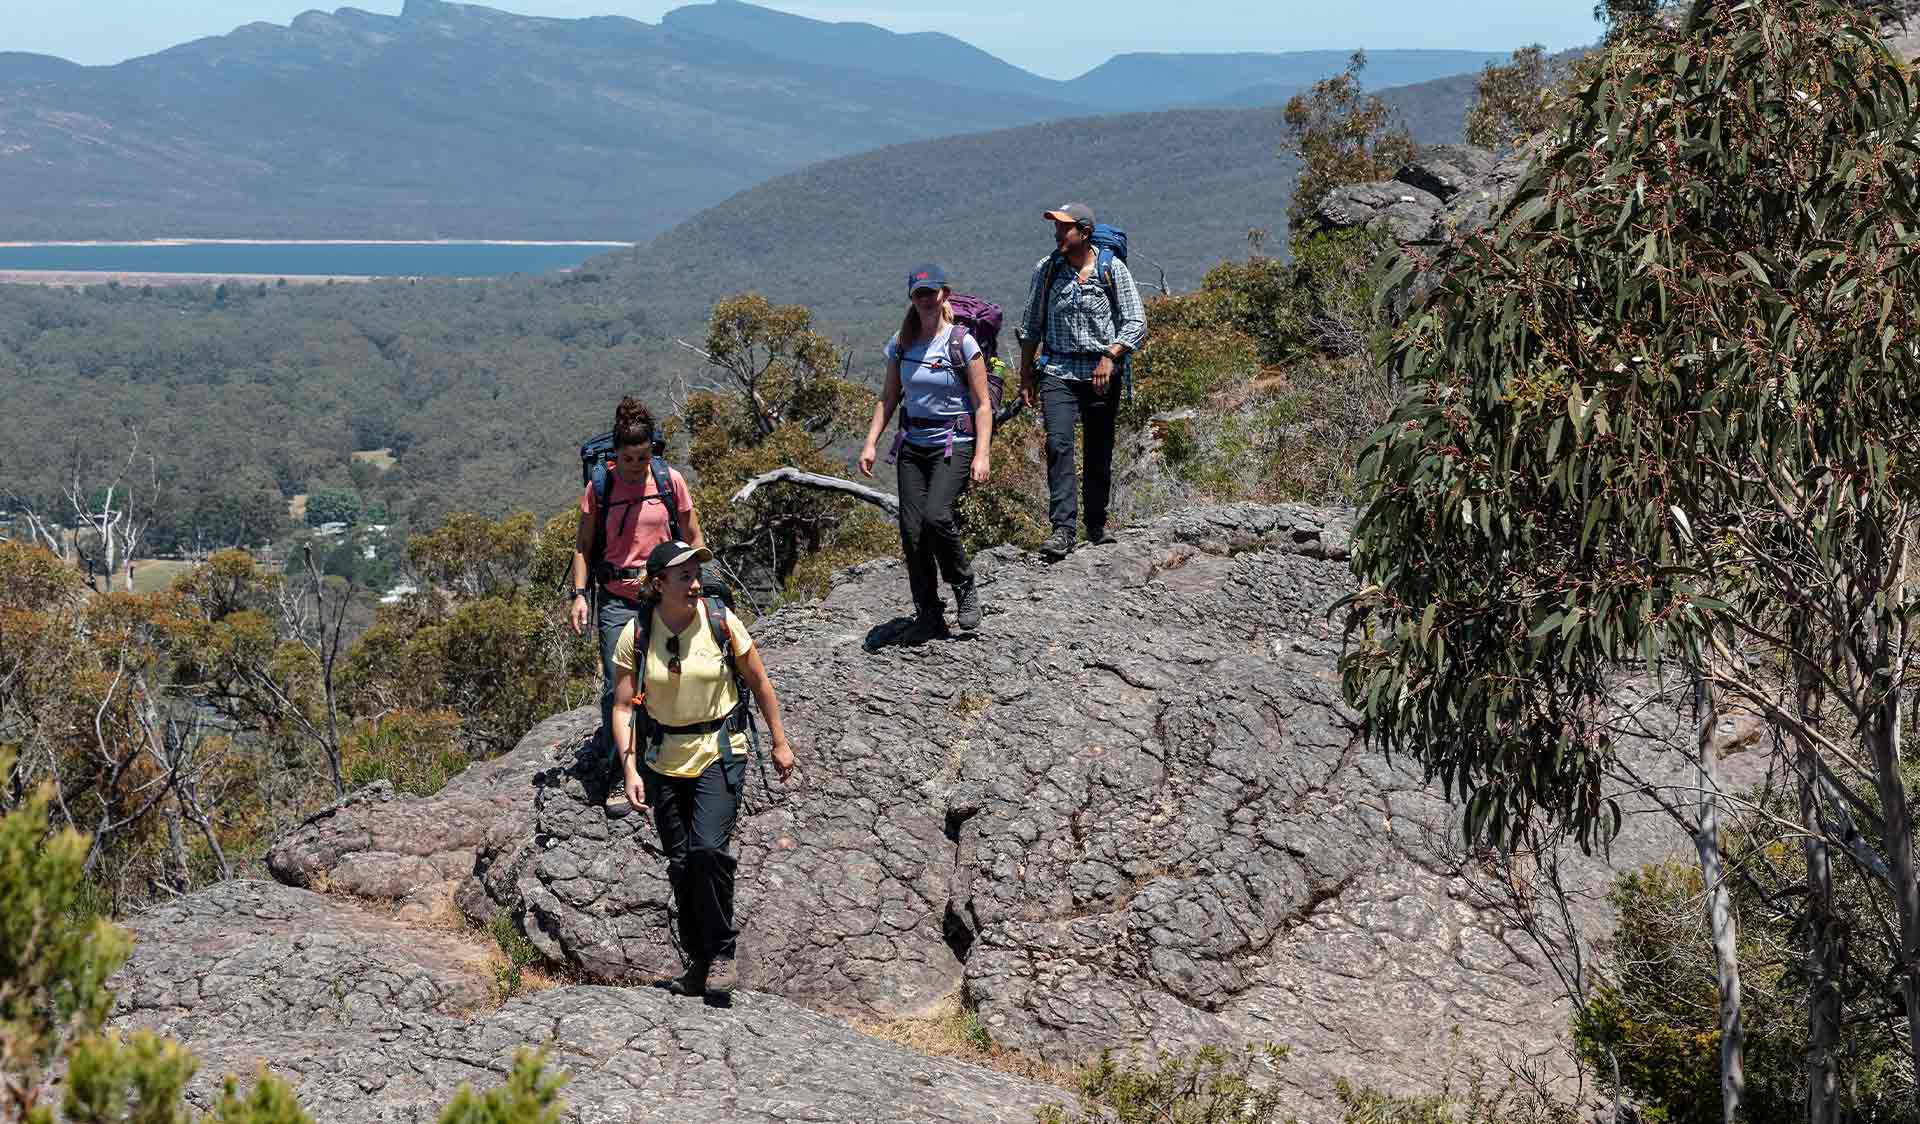 A group of hikers walk along the track near the Chatauqua Peak on the Grampians Peaks Trail 